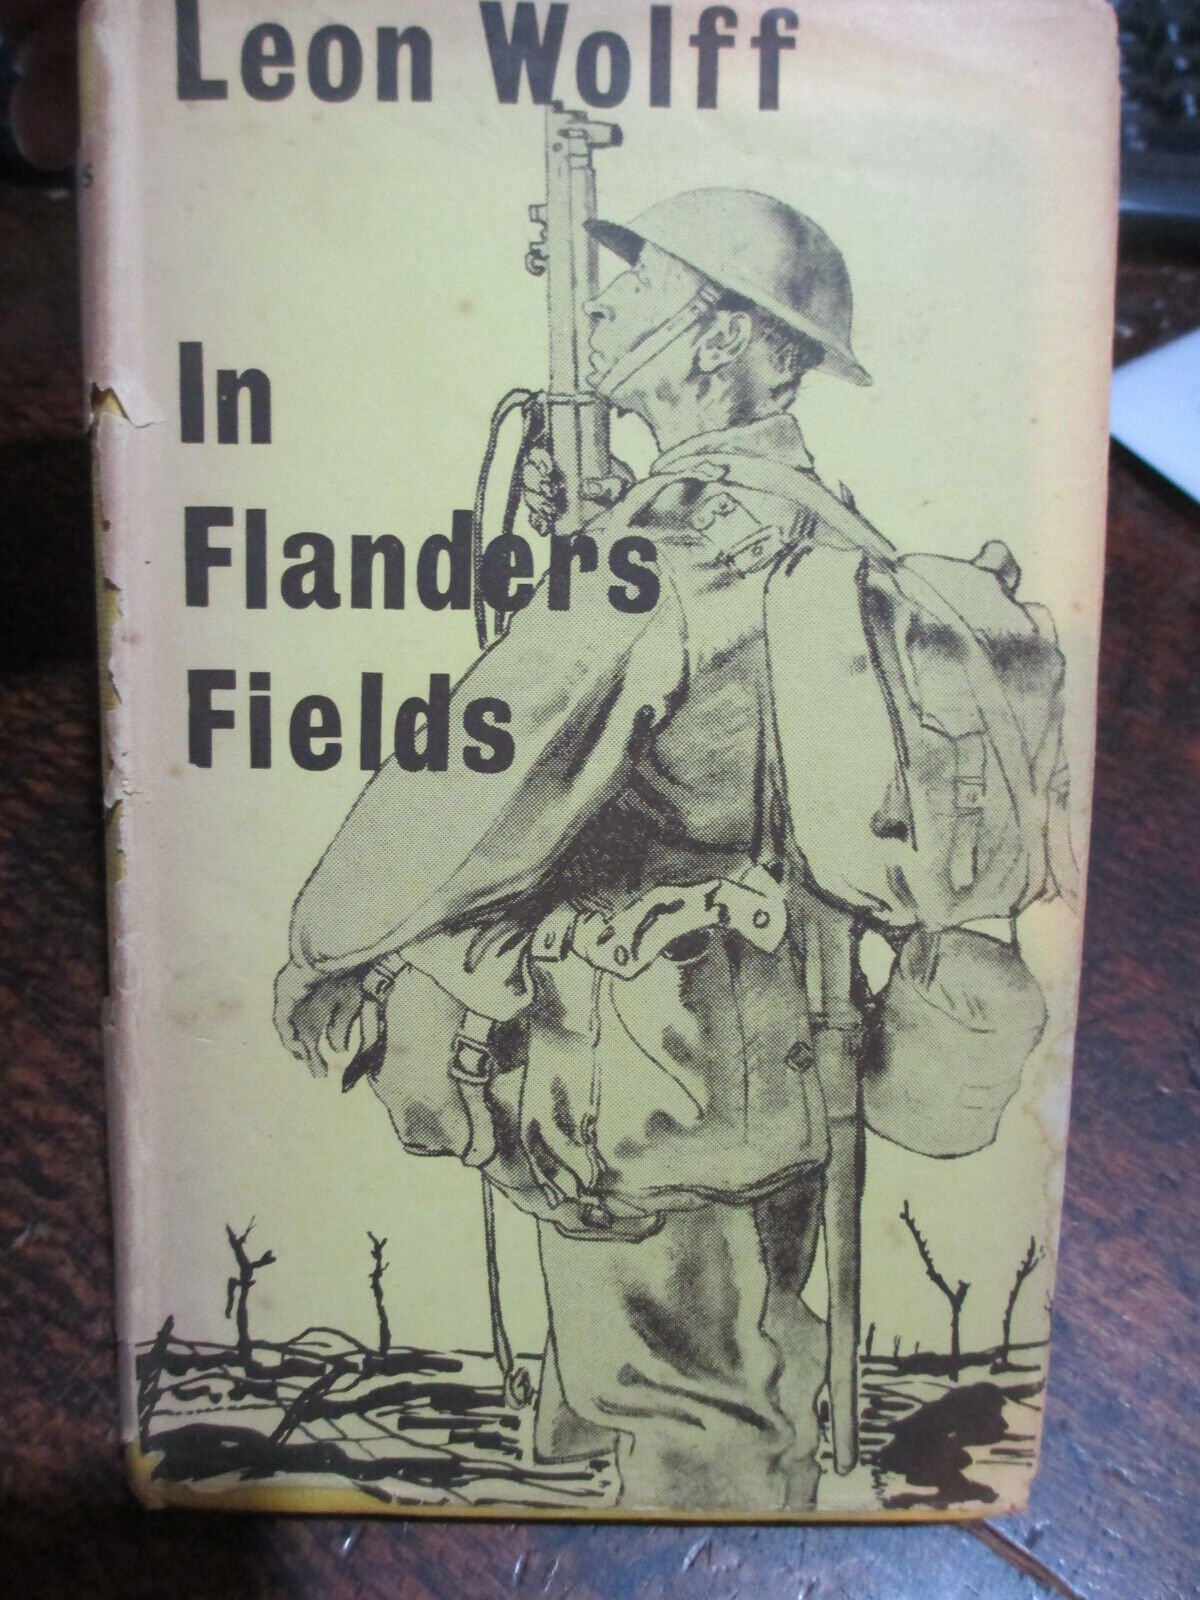 In Flanders Fields The 1917 Campaign book leon wolff 1960 edition